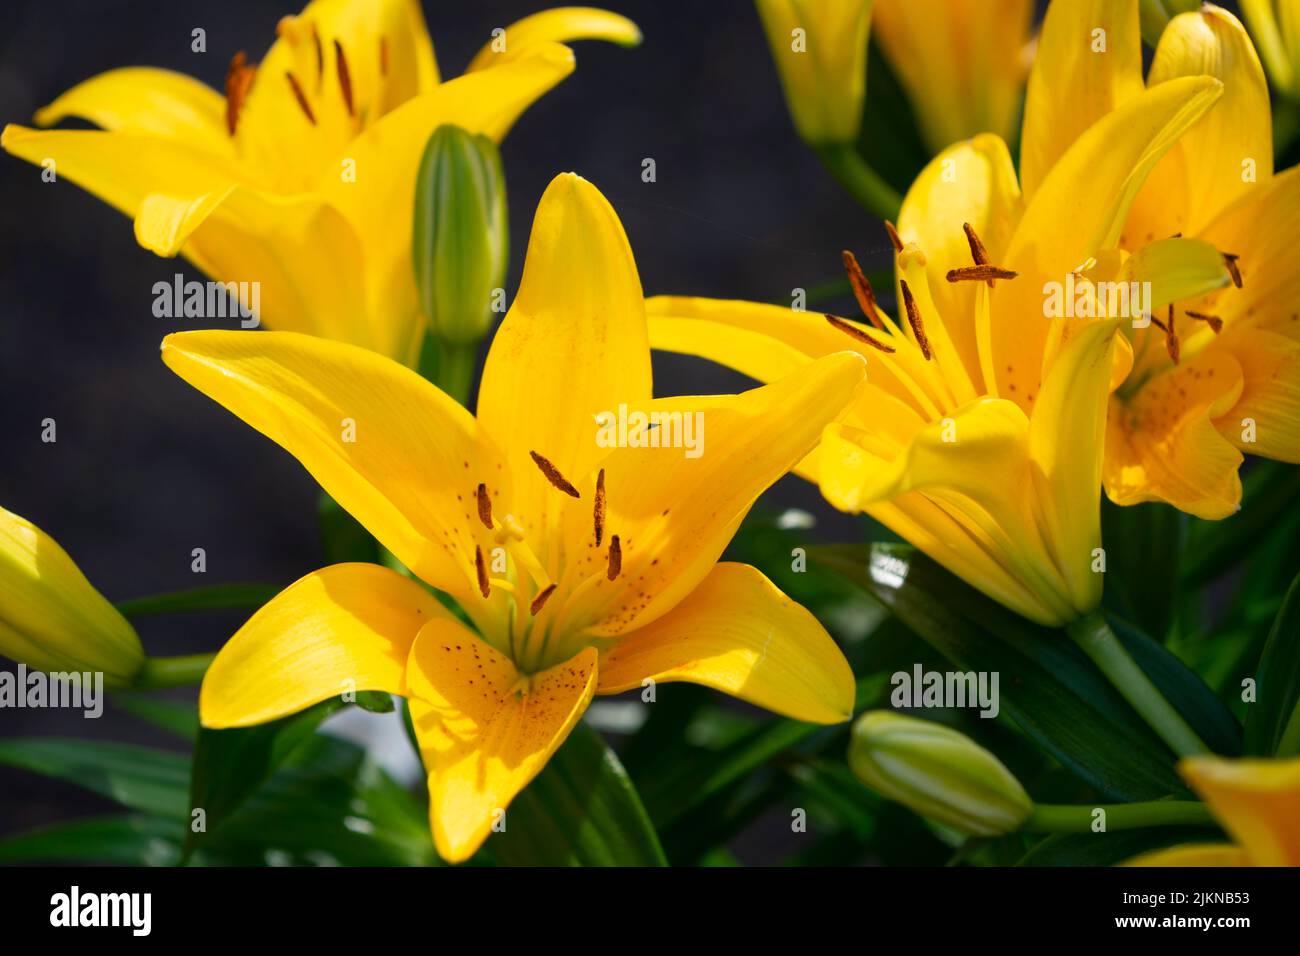 A close up of yellow lily flowers Stock Photo